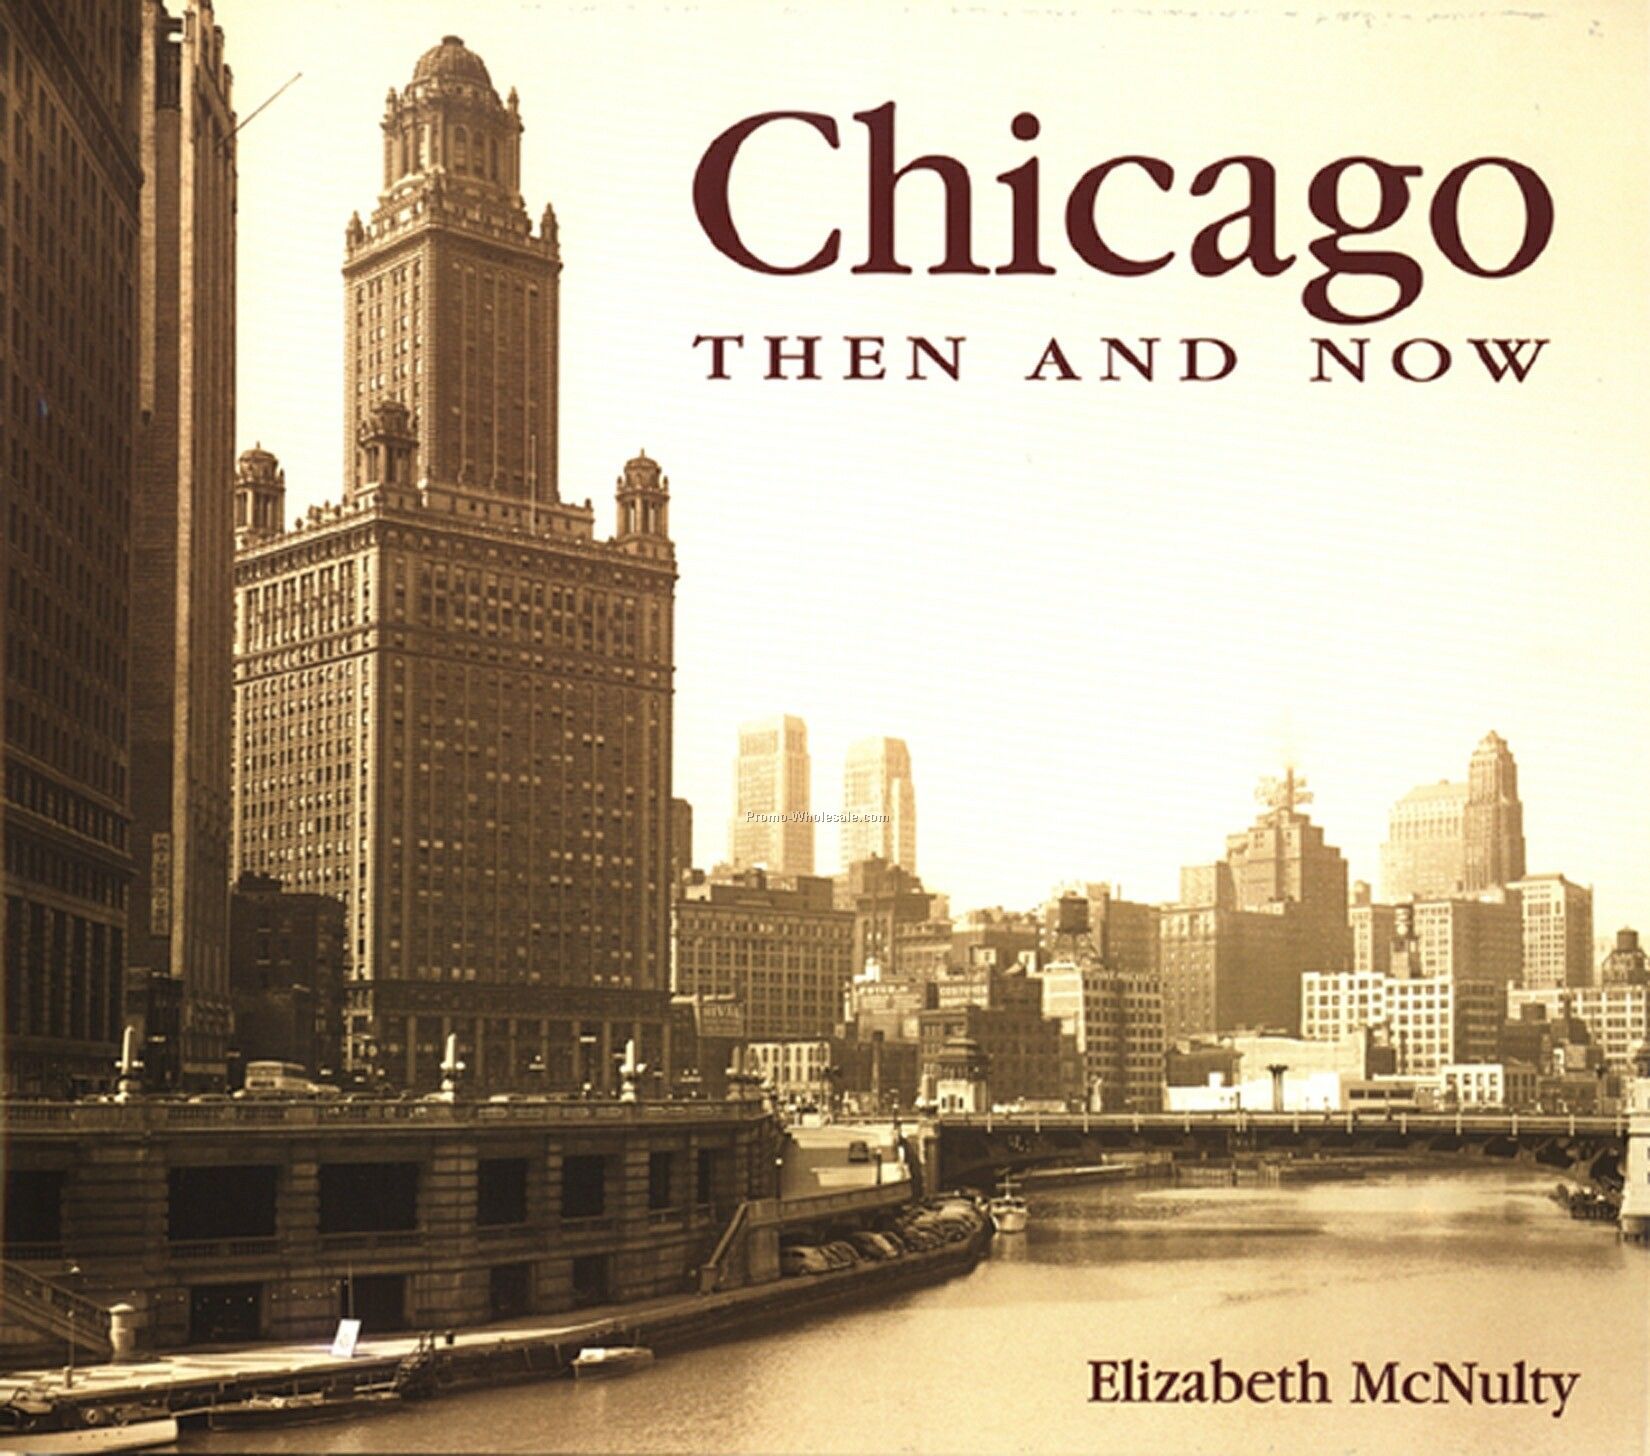 Chicago Then & Now City Series Book - Hardcover Edition